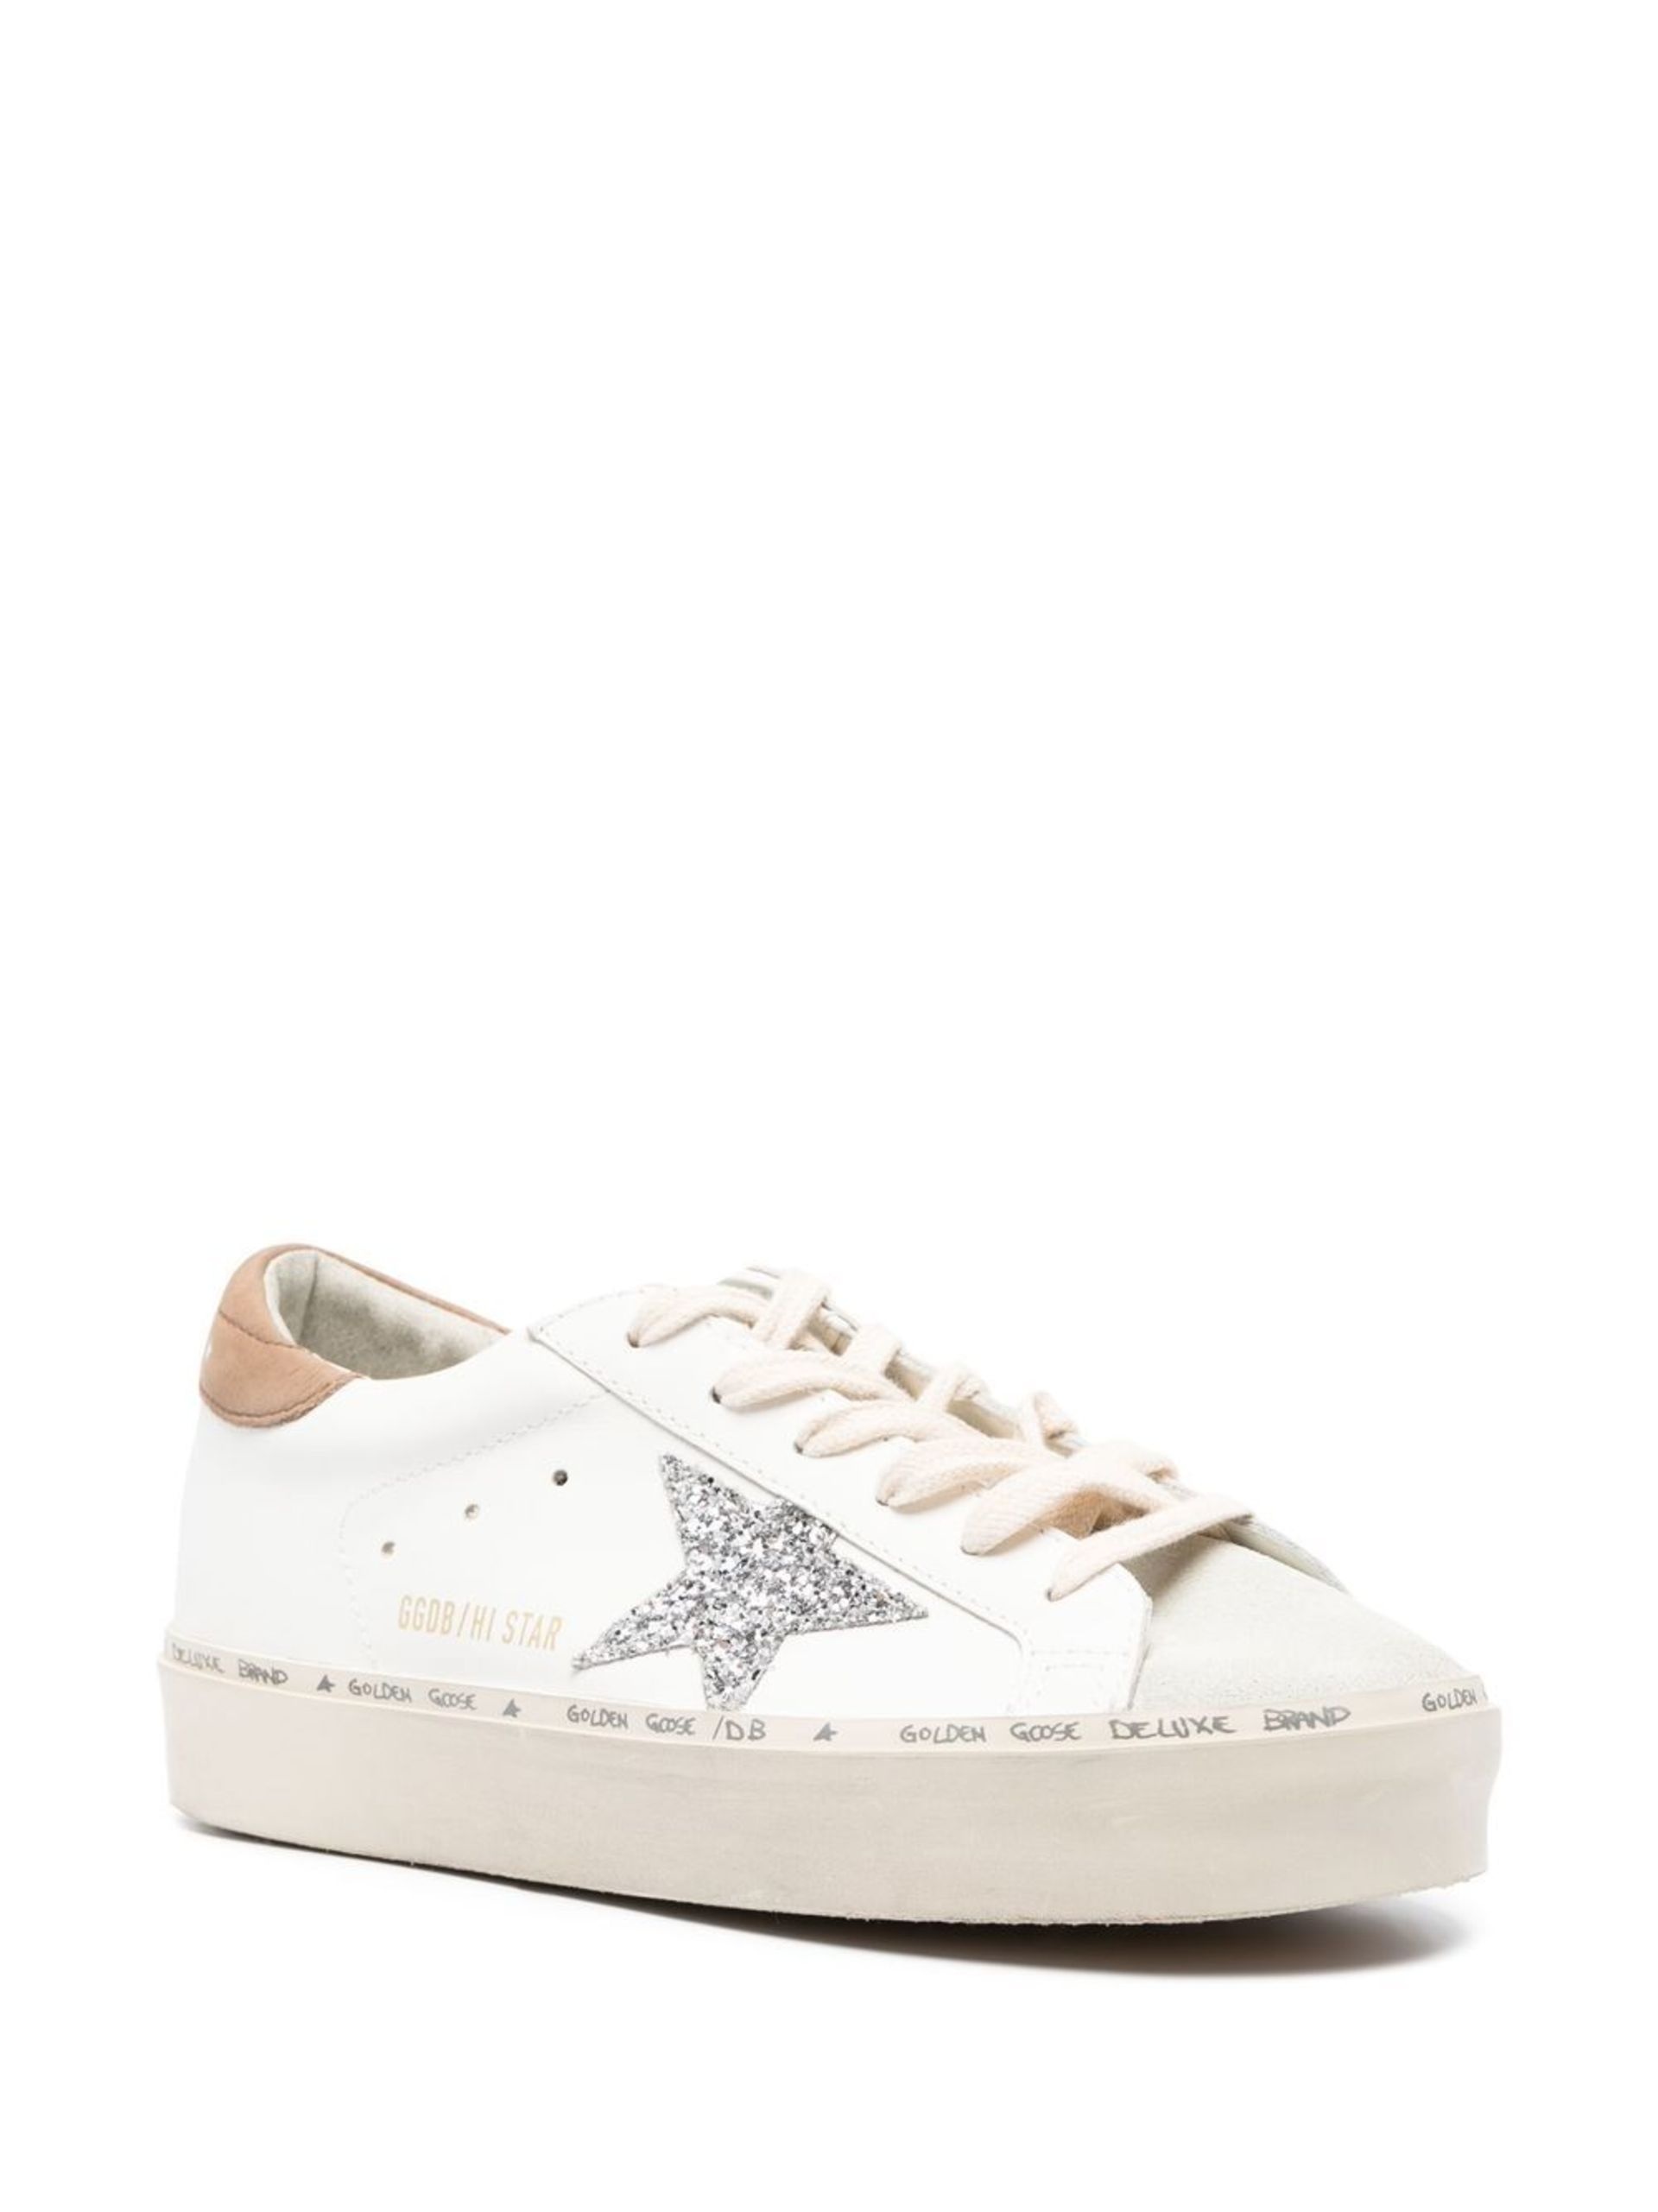 white Hi Star leather sneakers - 2